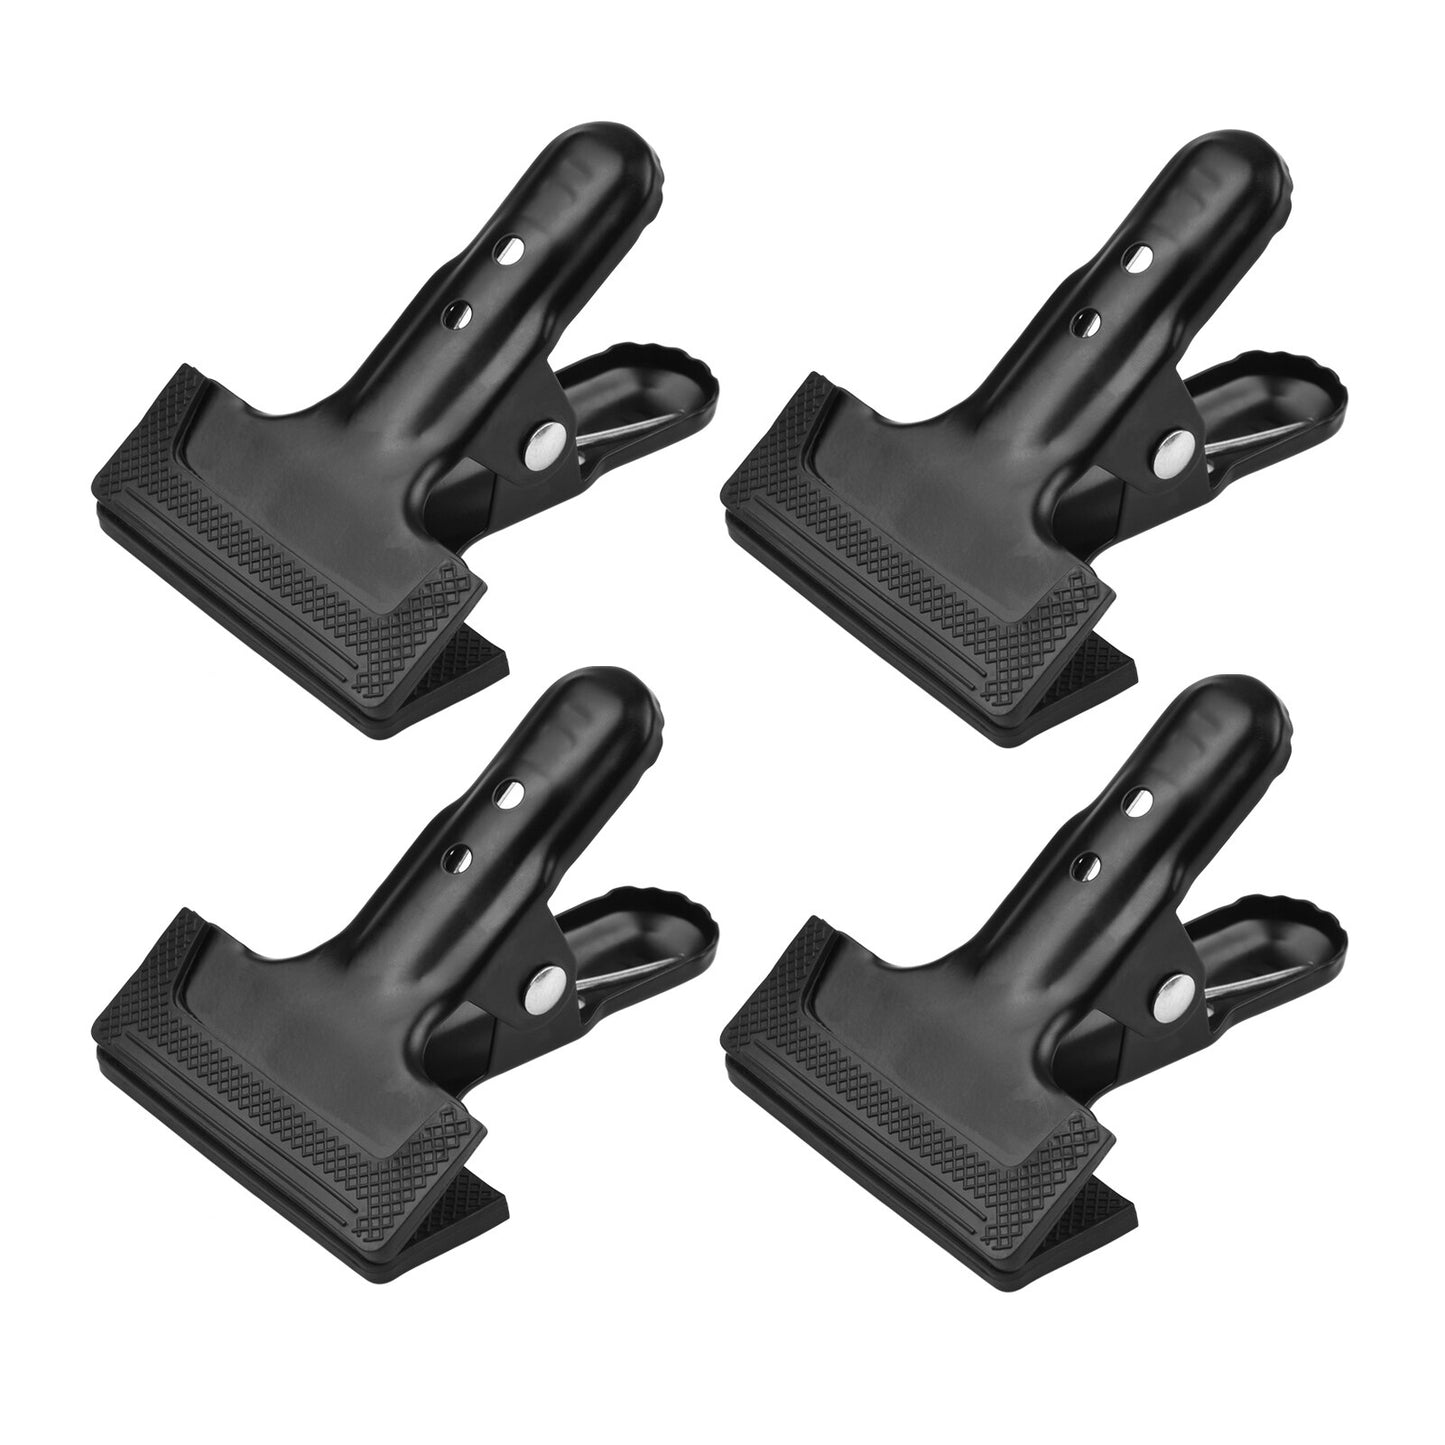 Up to 10Pcs HRIDZ Heavy Duty Spring Metal Clip Photography Backdrop Clamps with Rubber Pad